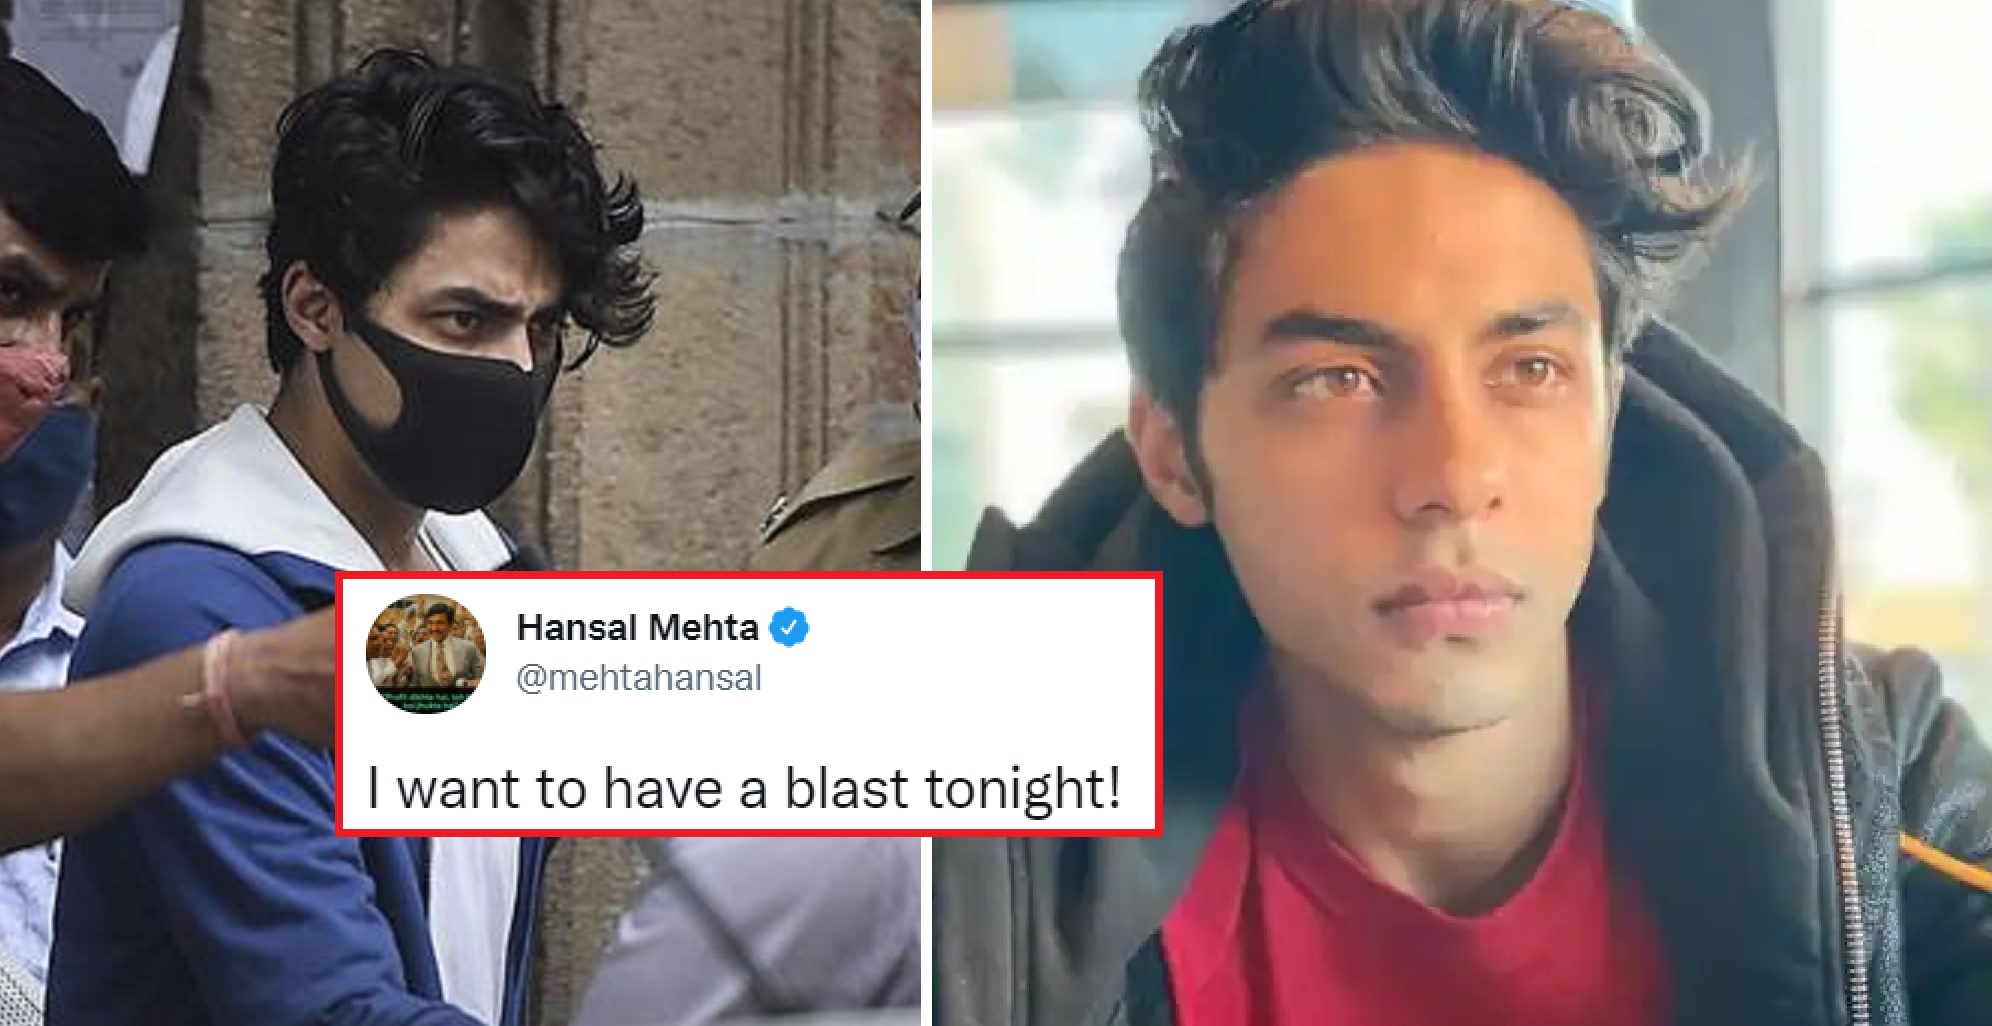 Bollywood Celebrates Aryan Khan’s Bail: Here’s How Everyone From Tinseltown Reacted